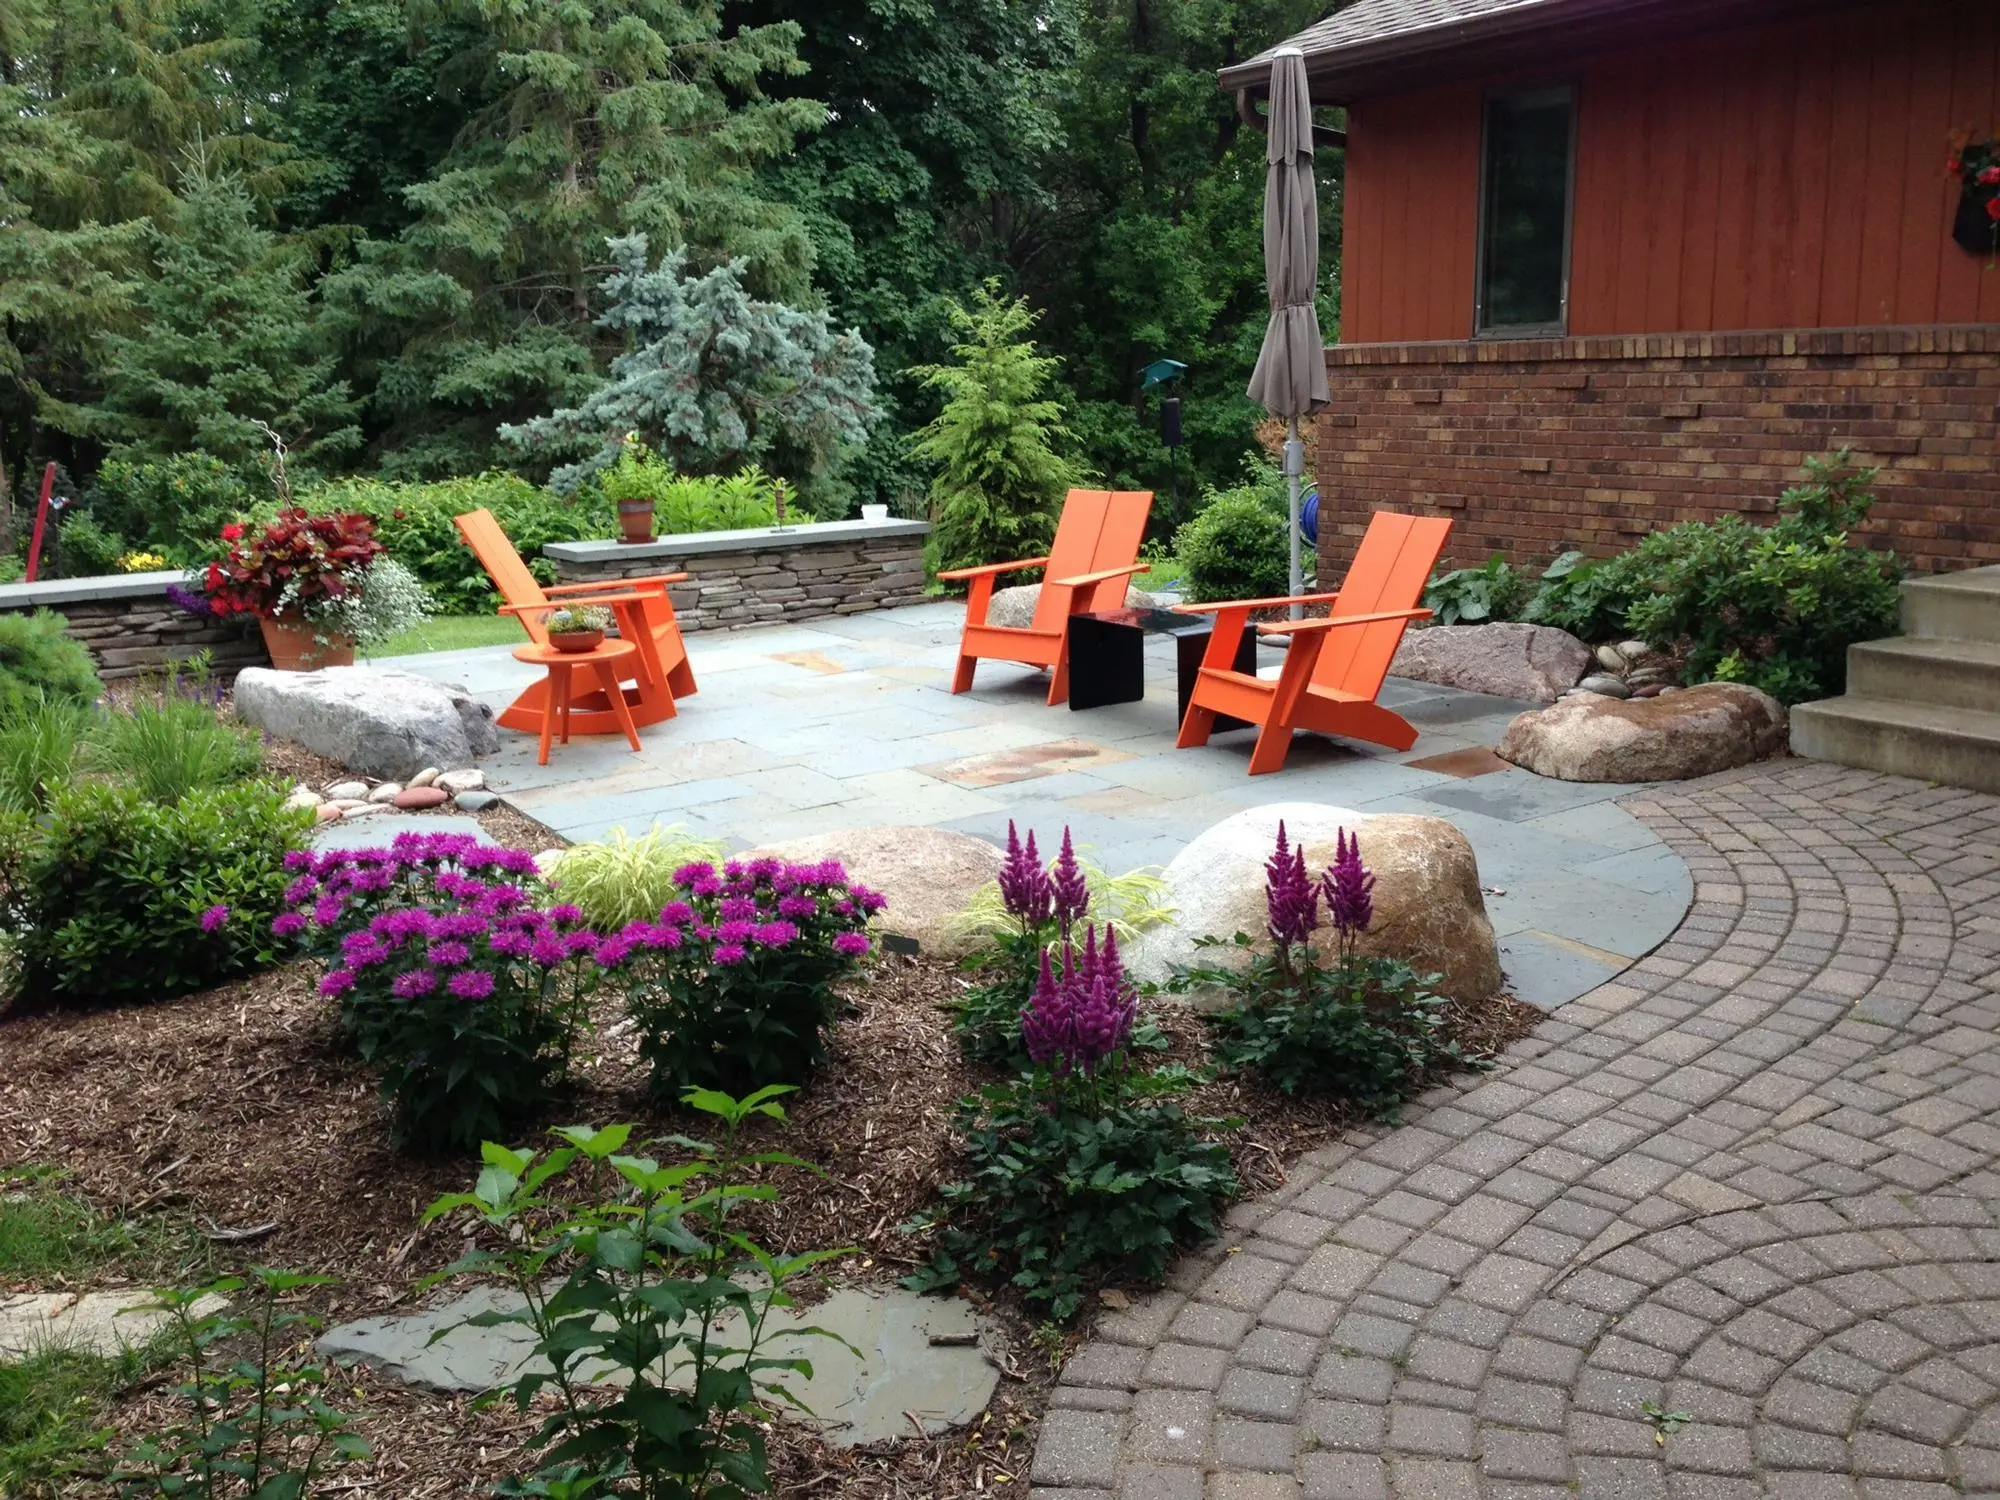 Landscaping around a patio setting